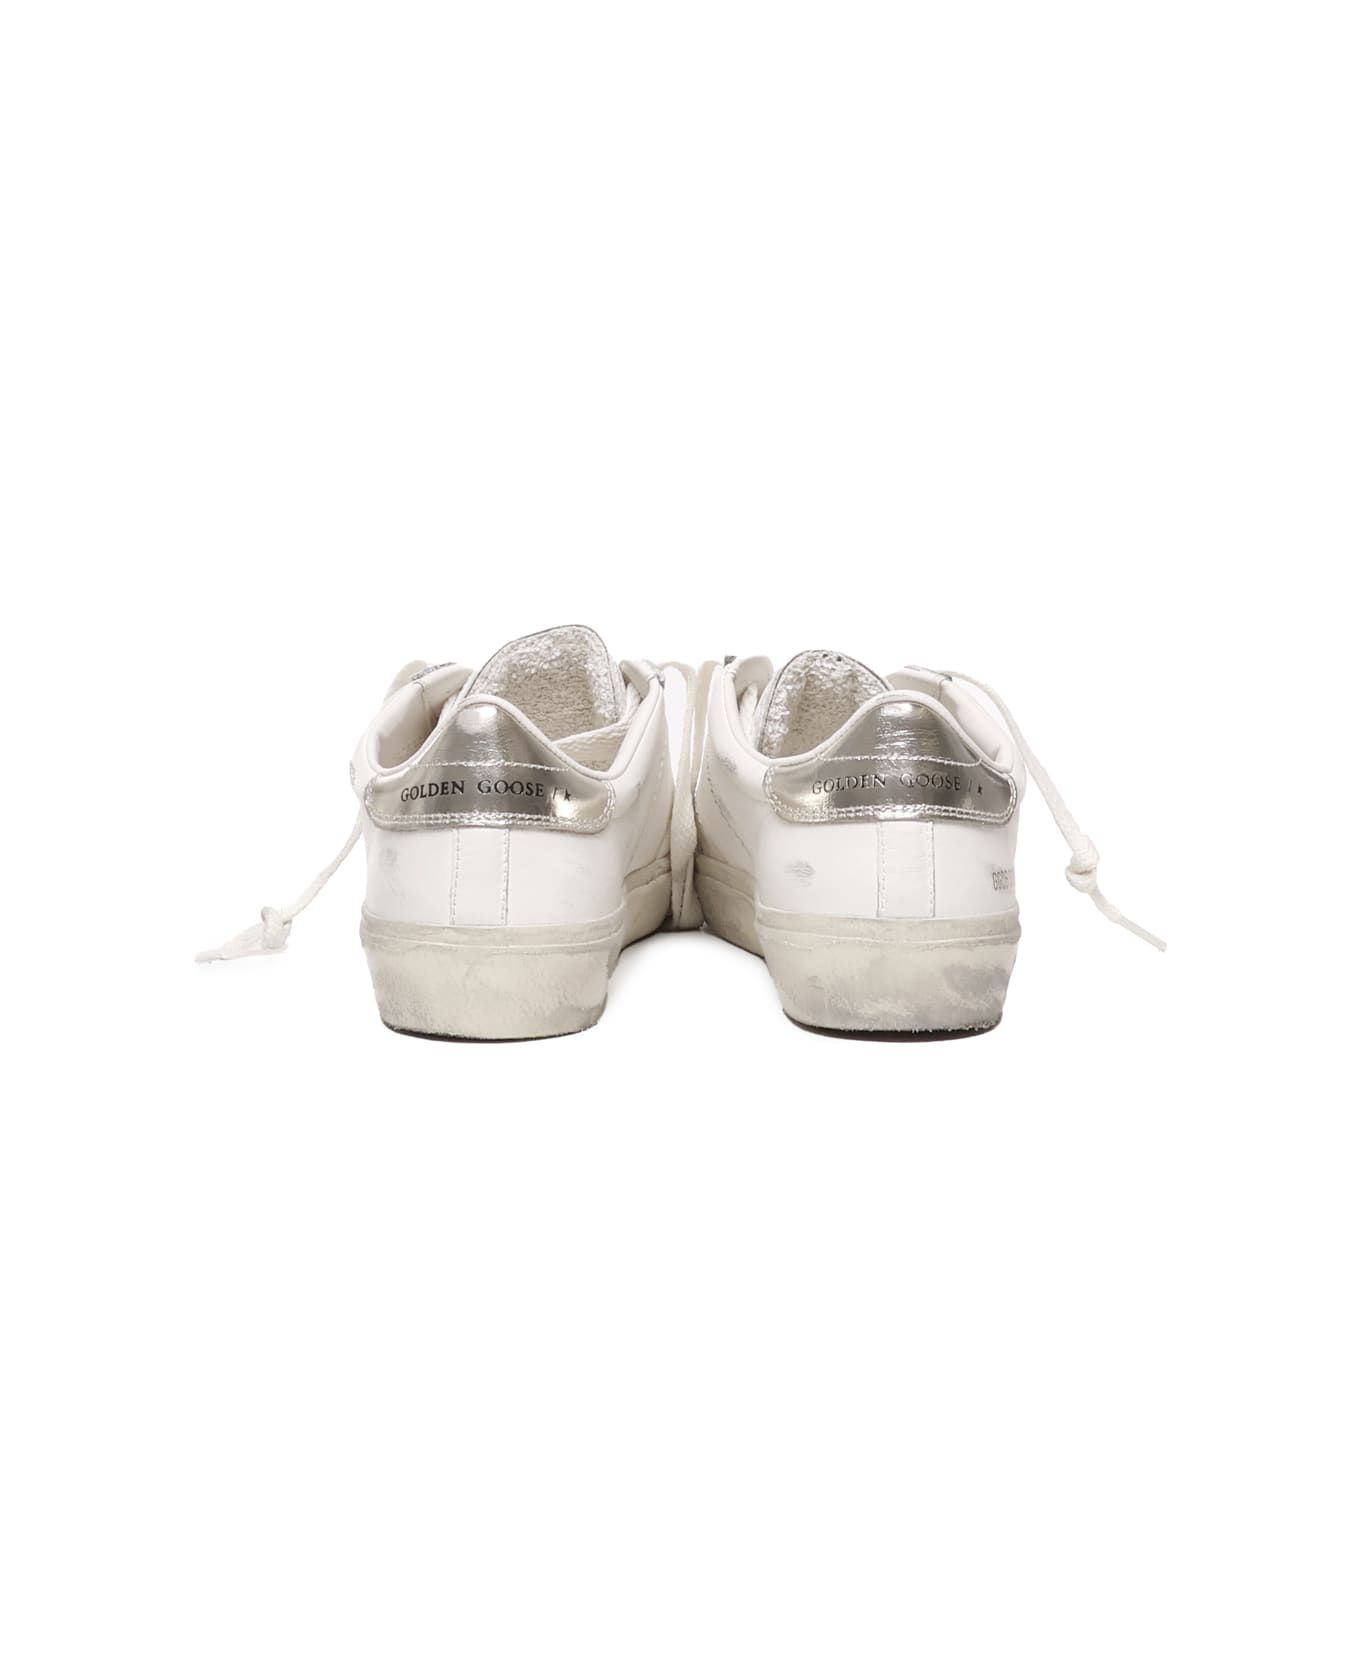 Golden Goose Soul Star Leather Sneakers - WHITE/GOLD